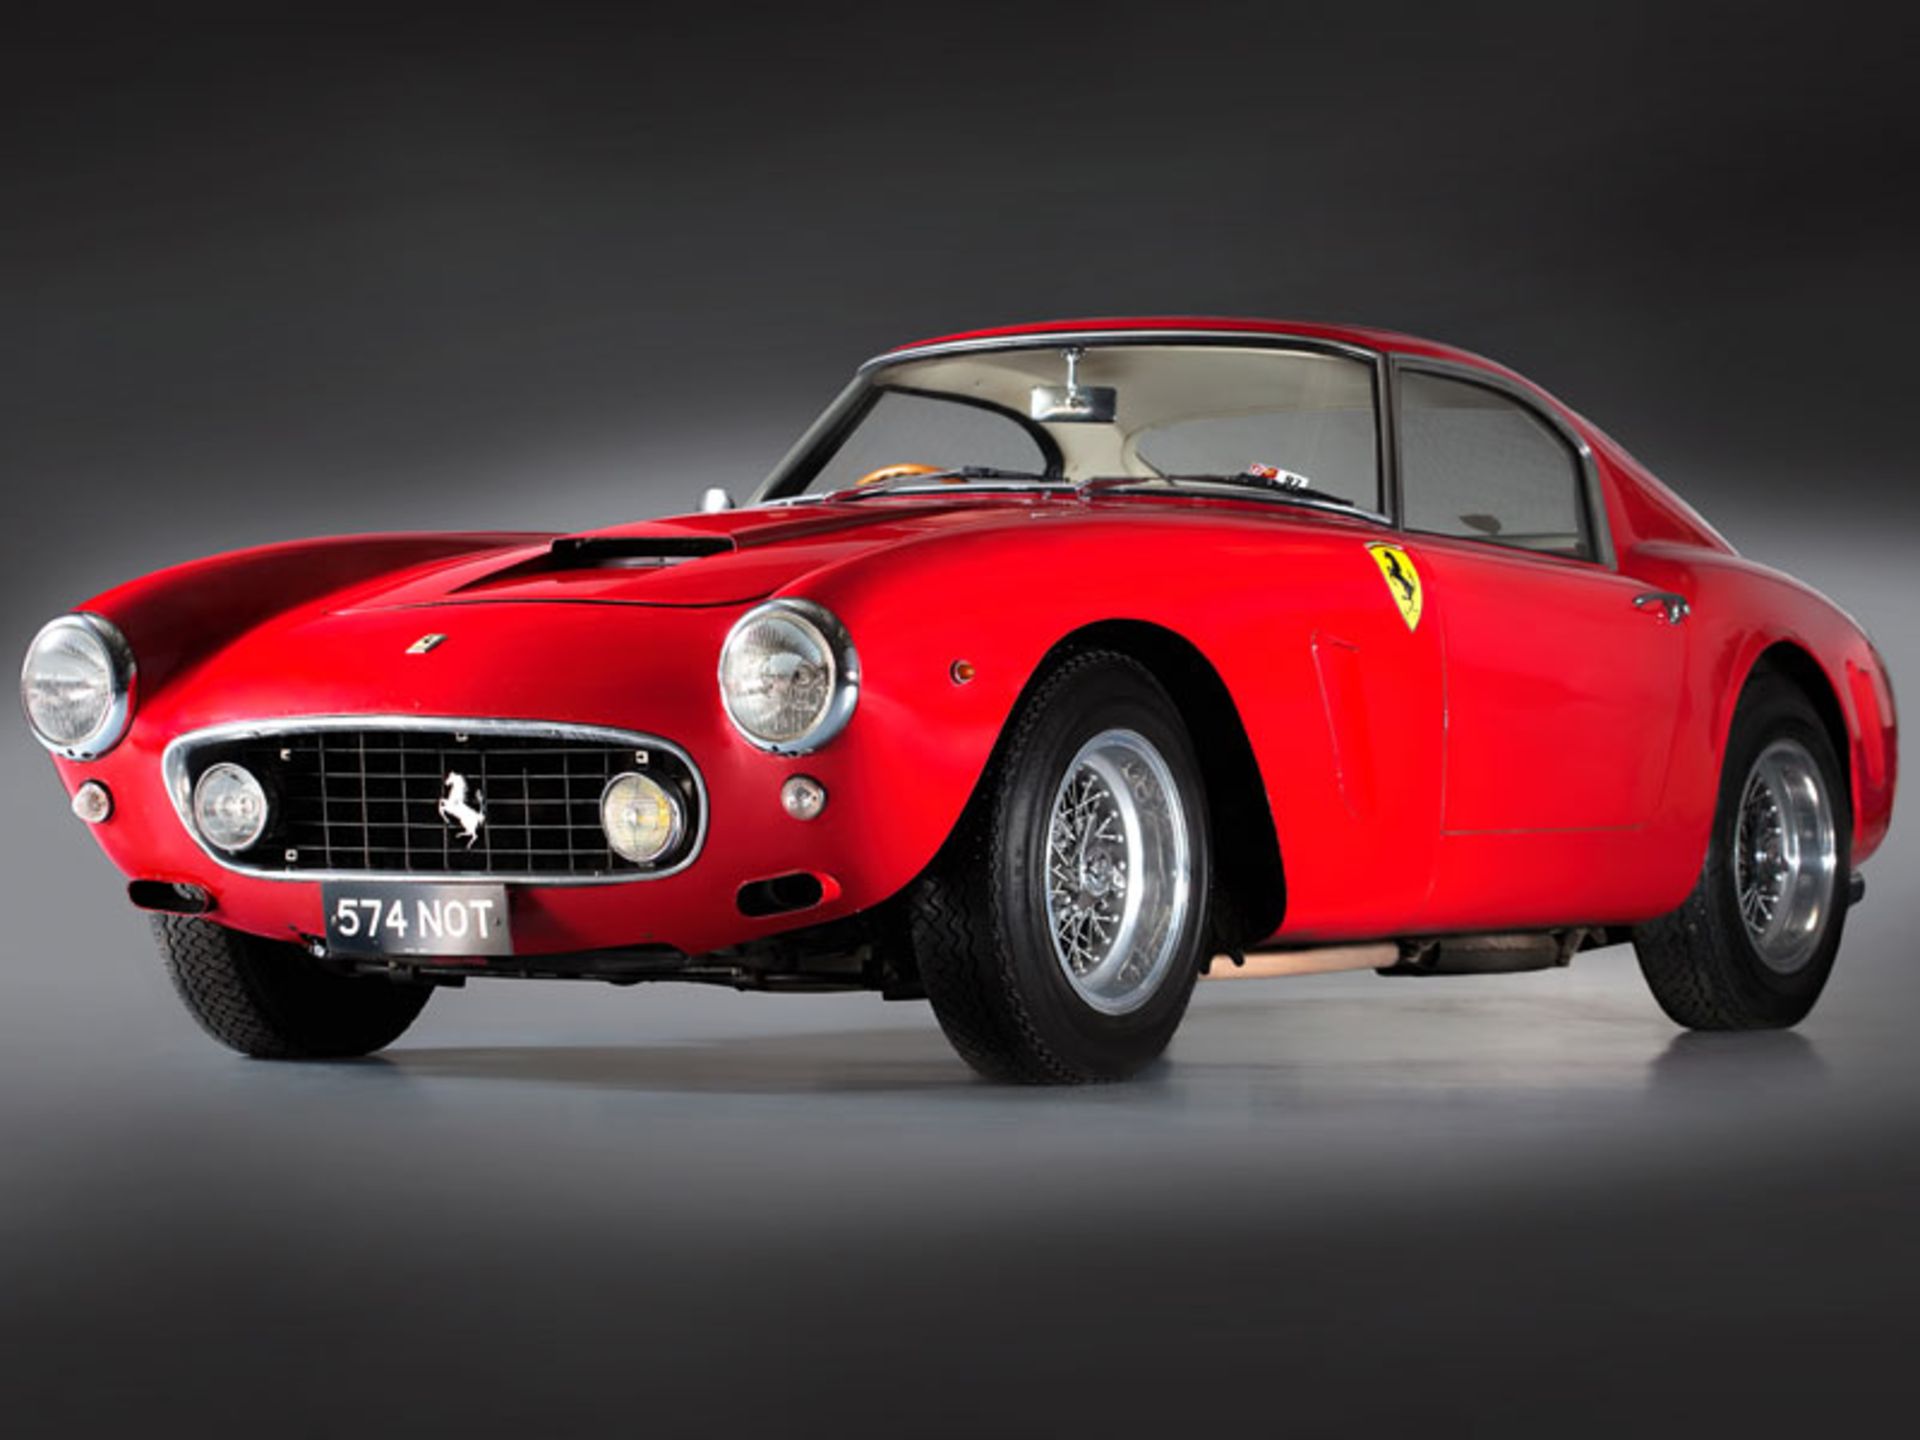 Registering to Bid on the Ferrari 250 GT SWB from the Richard Colton Collection:
- All